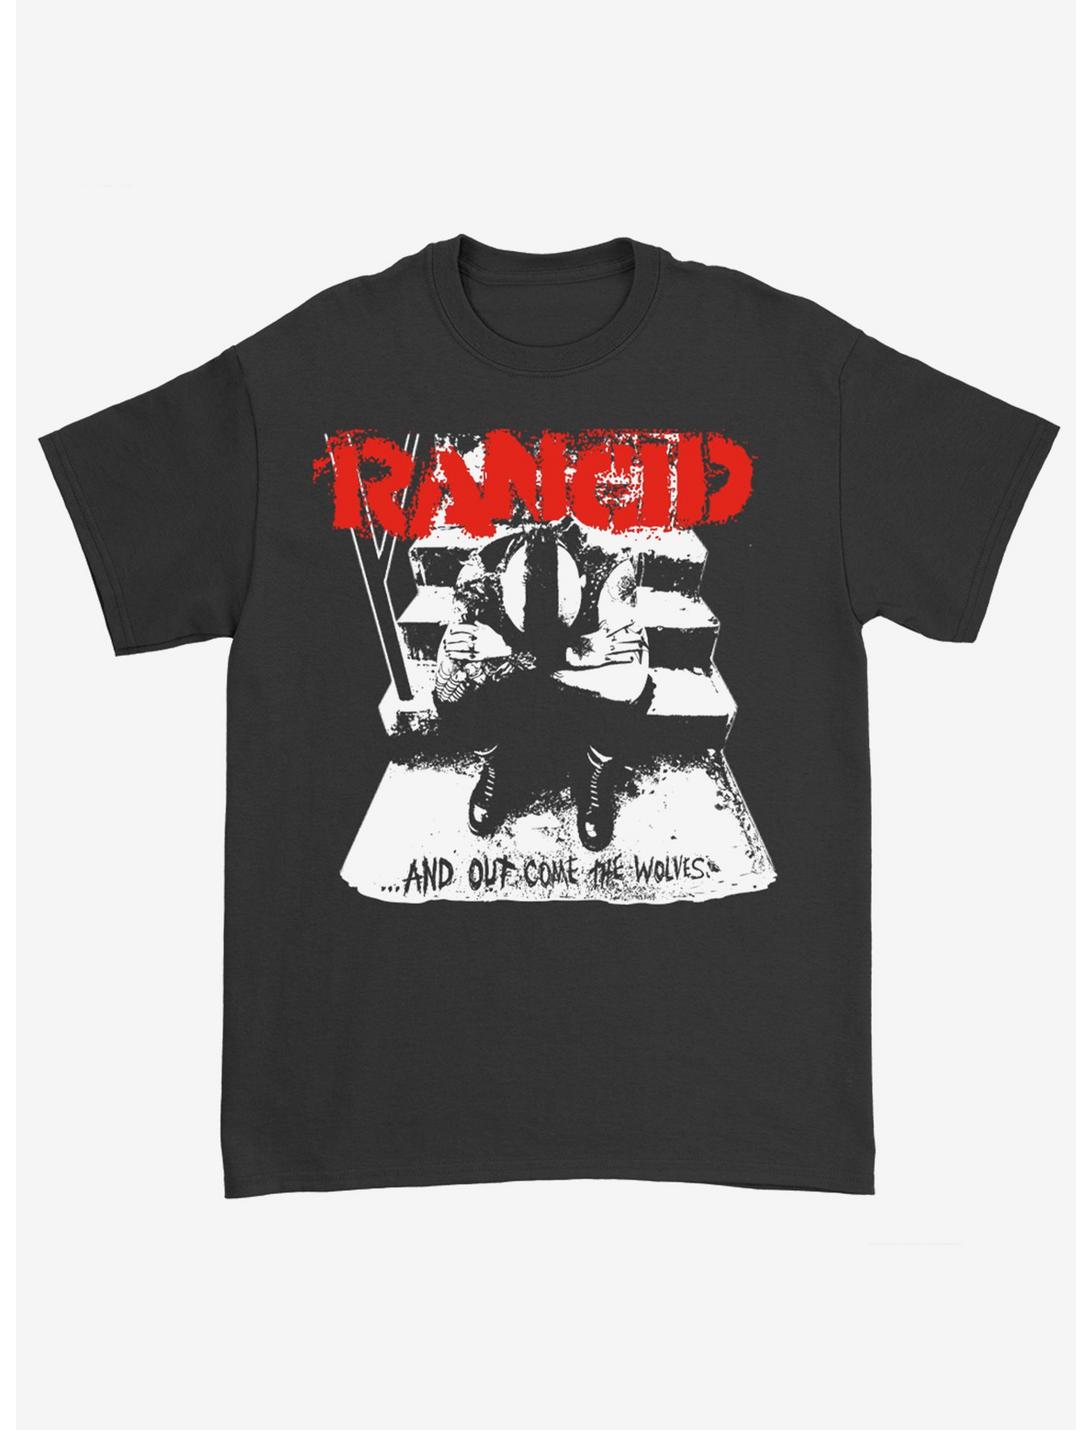 Rancid ...And Out Come The Wolves T-Shirt, BLACK, hi-res